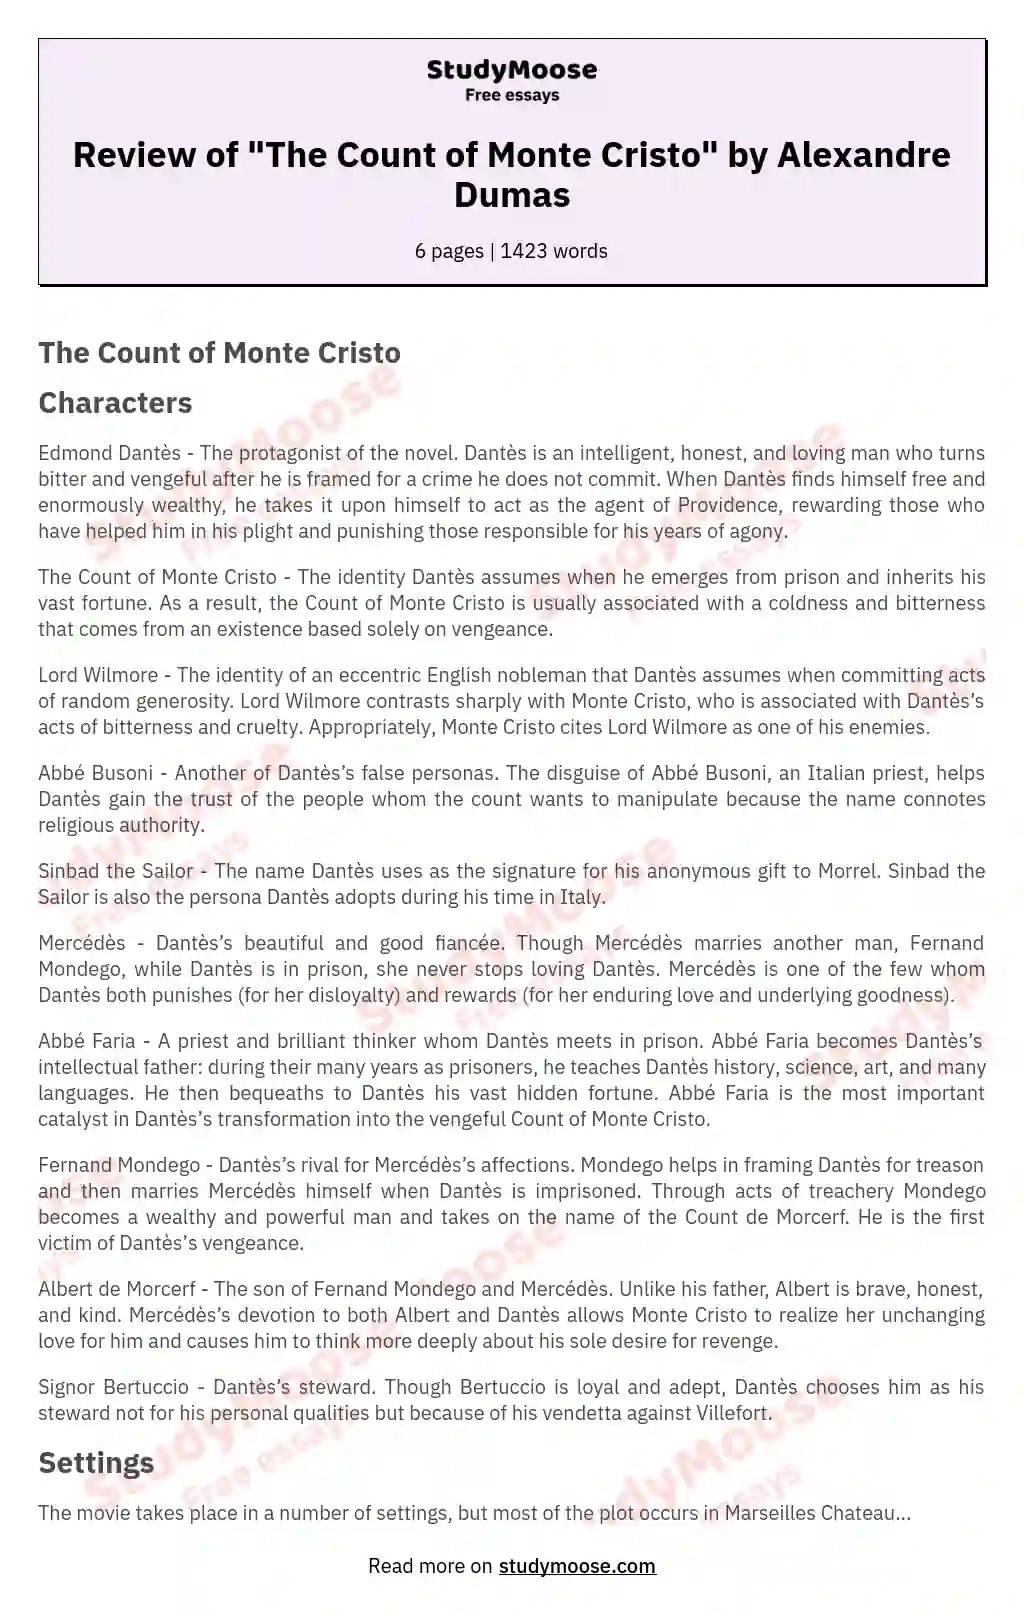 Review of "The Count of Monte Cristo" by Alexandre Dumas